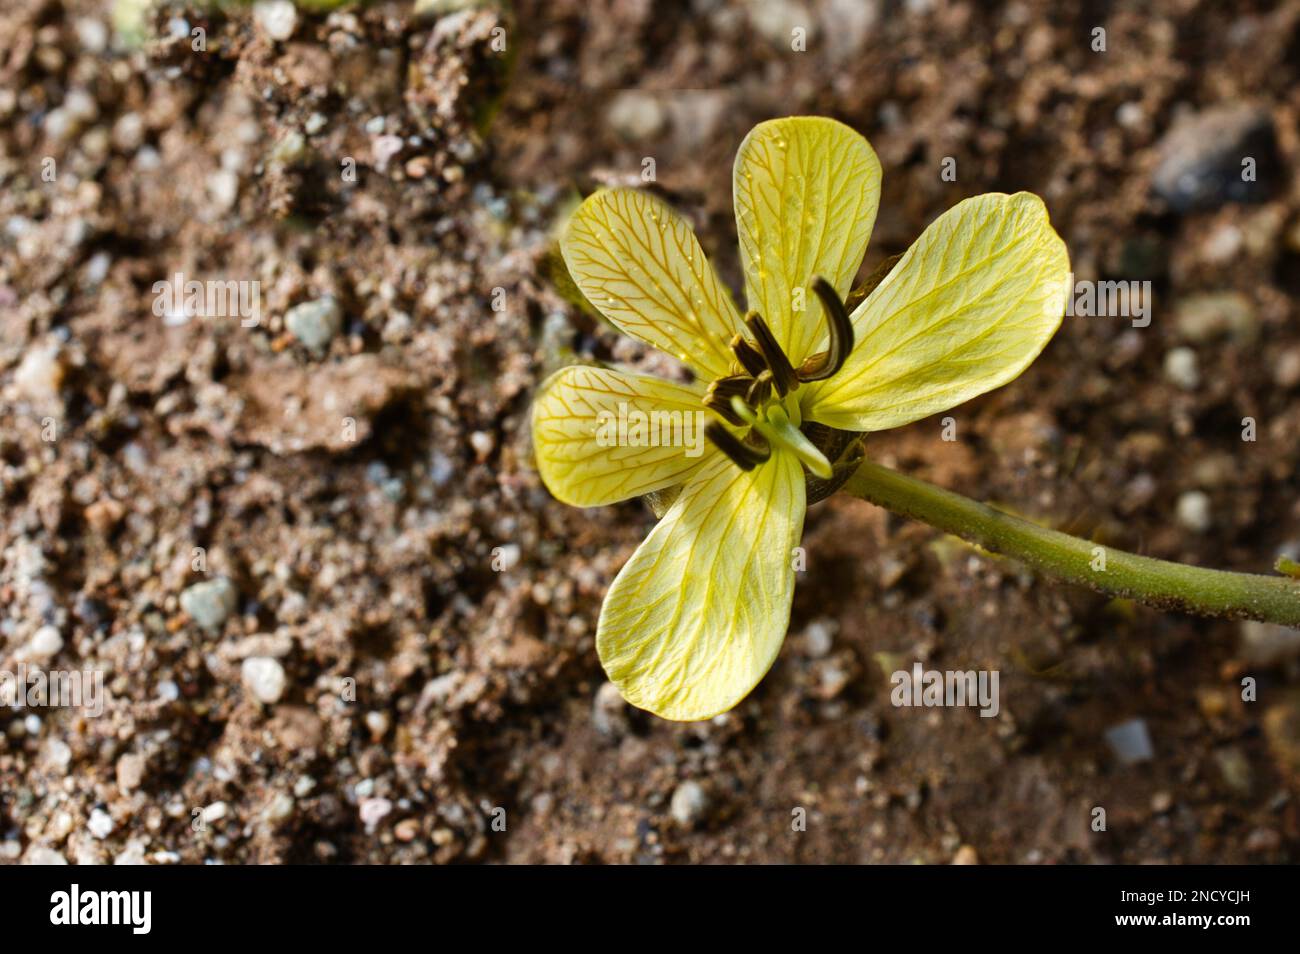 A closeup of Brassica tournefortii against brown soil background Stock Photo